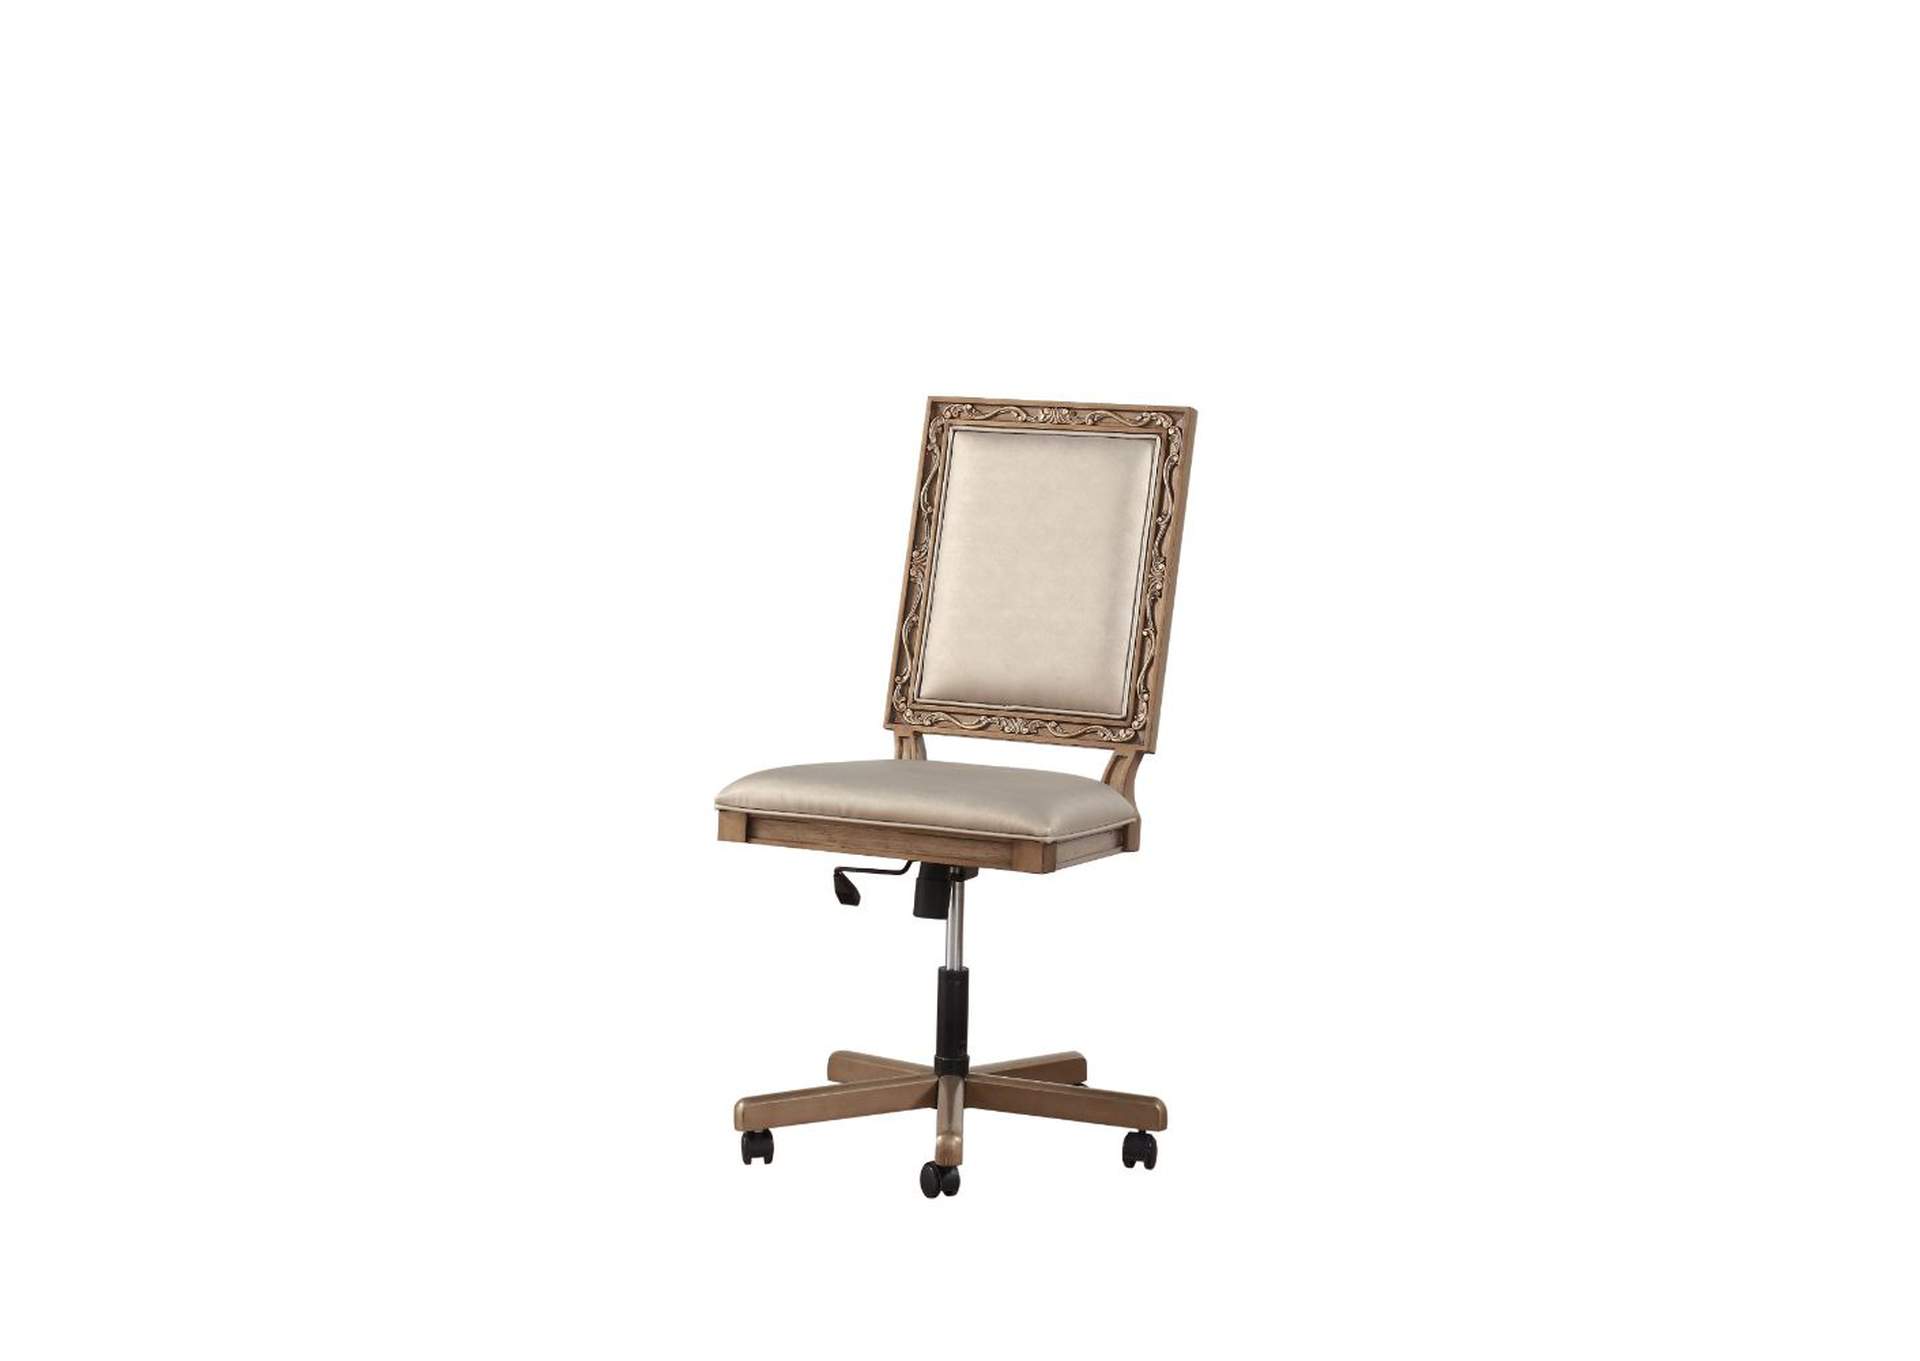 Orianne Champagne PU & Antique Gold Executive Office Chair,Acme